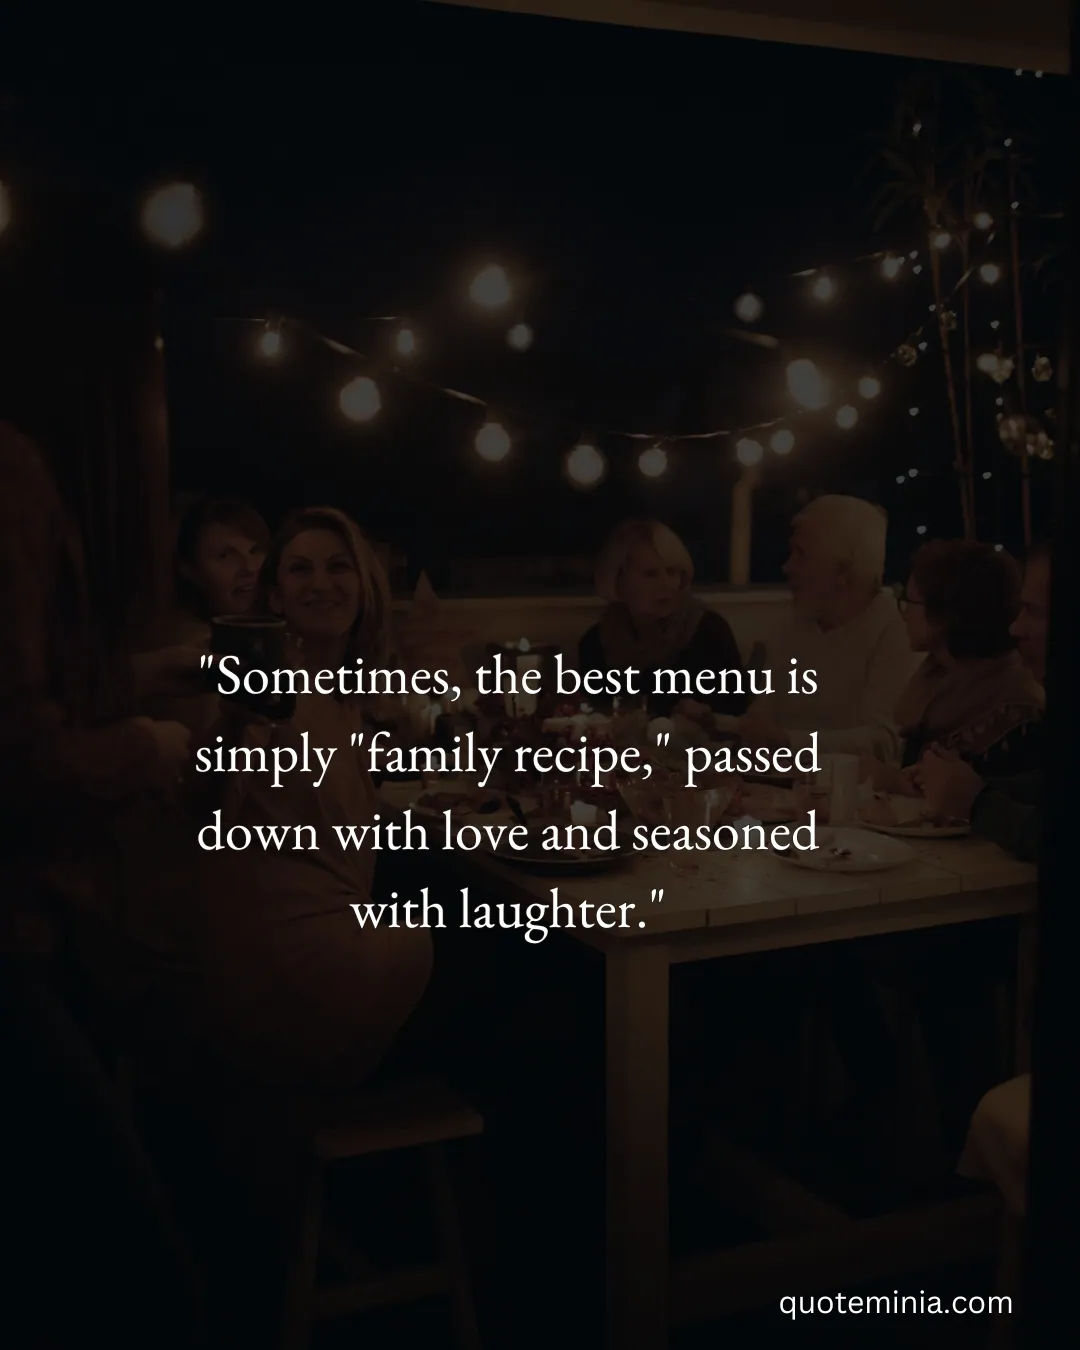 Dinner Out with Family Quotes